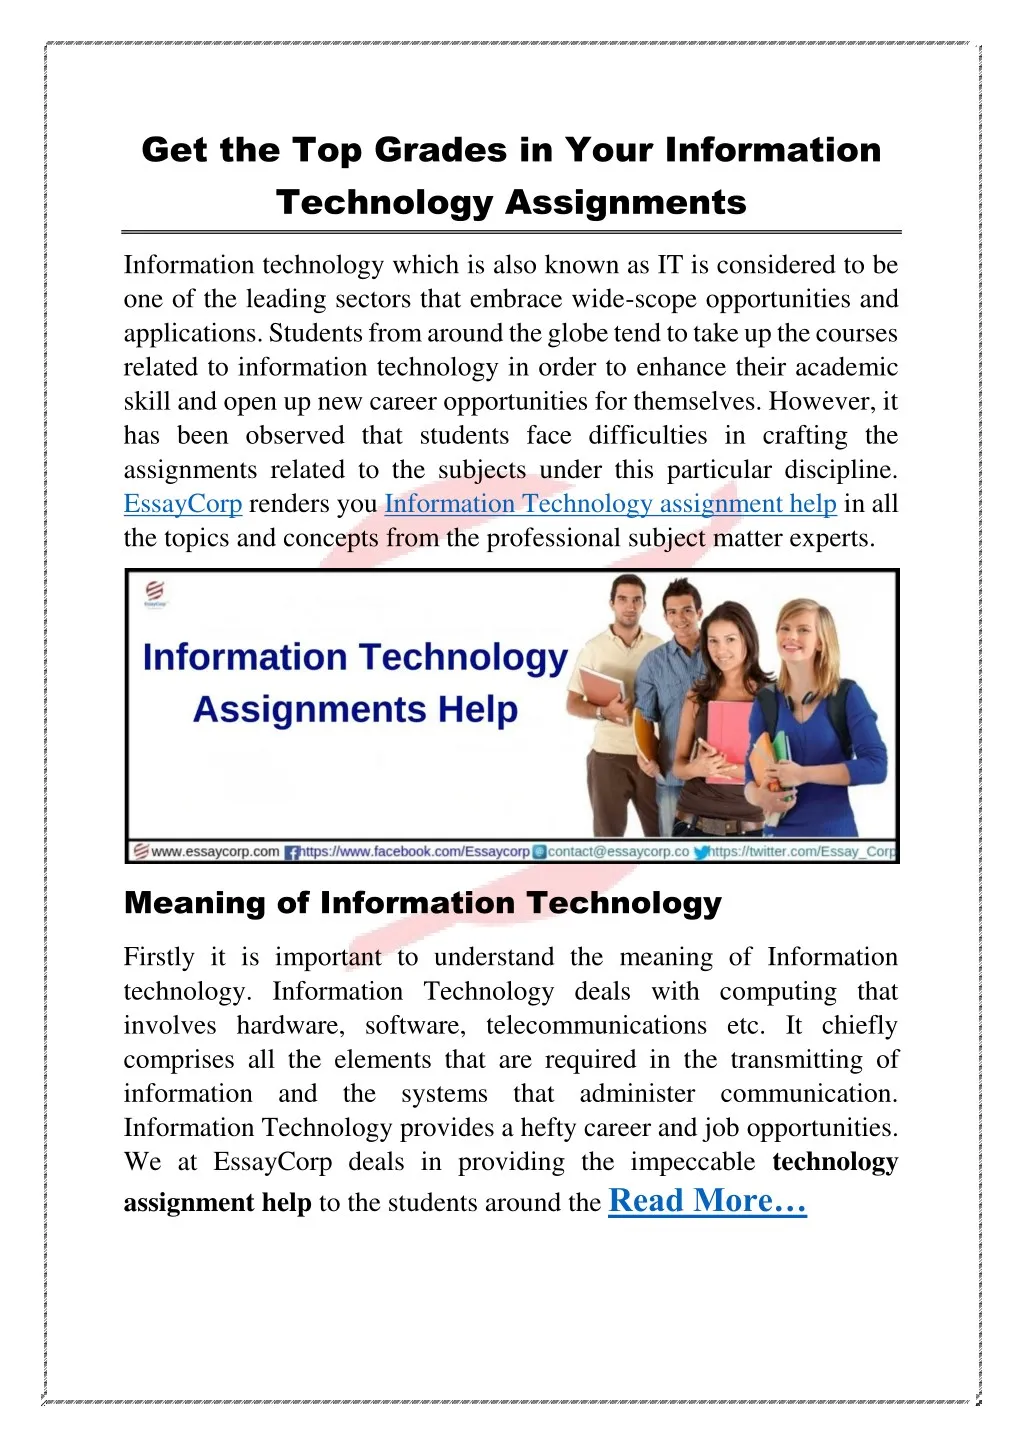 get the top grades in your information technology